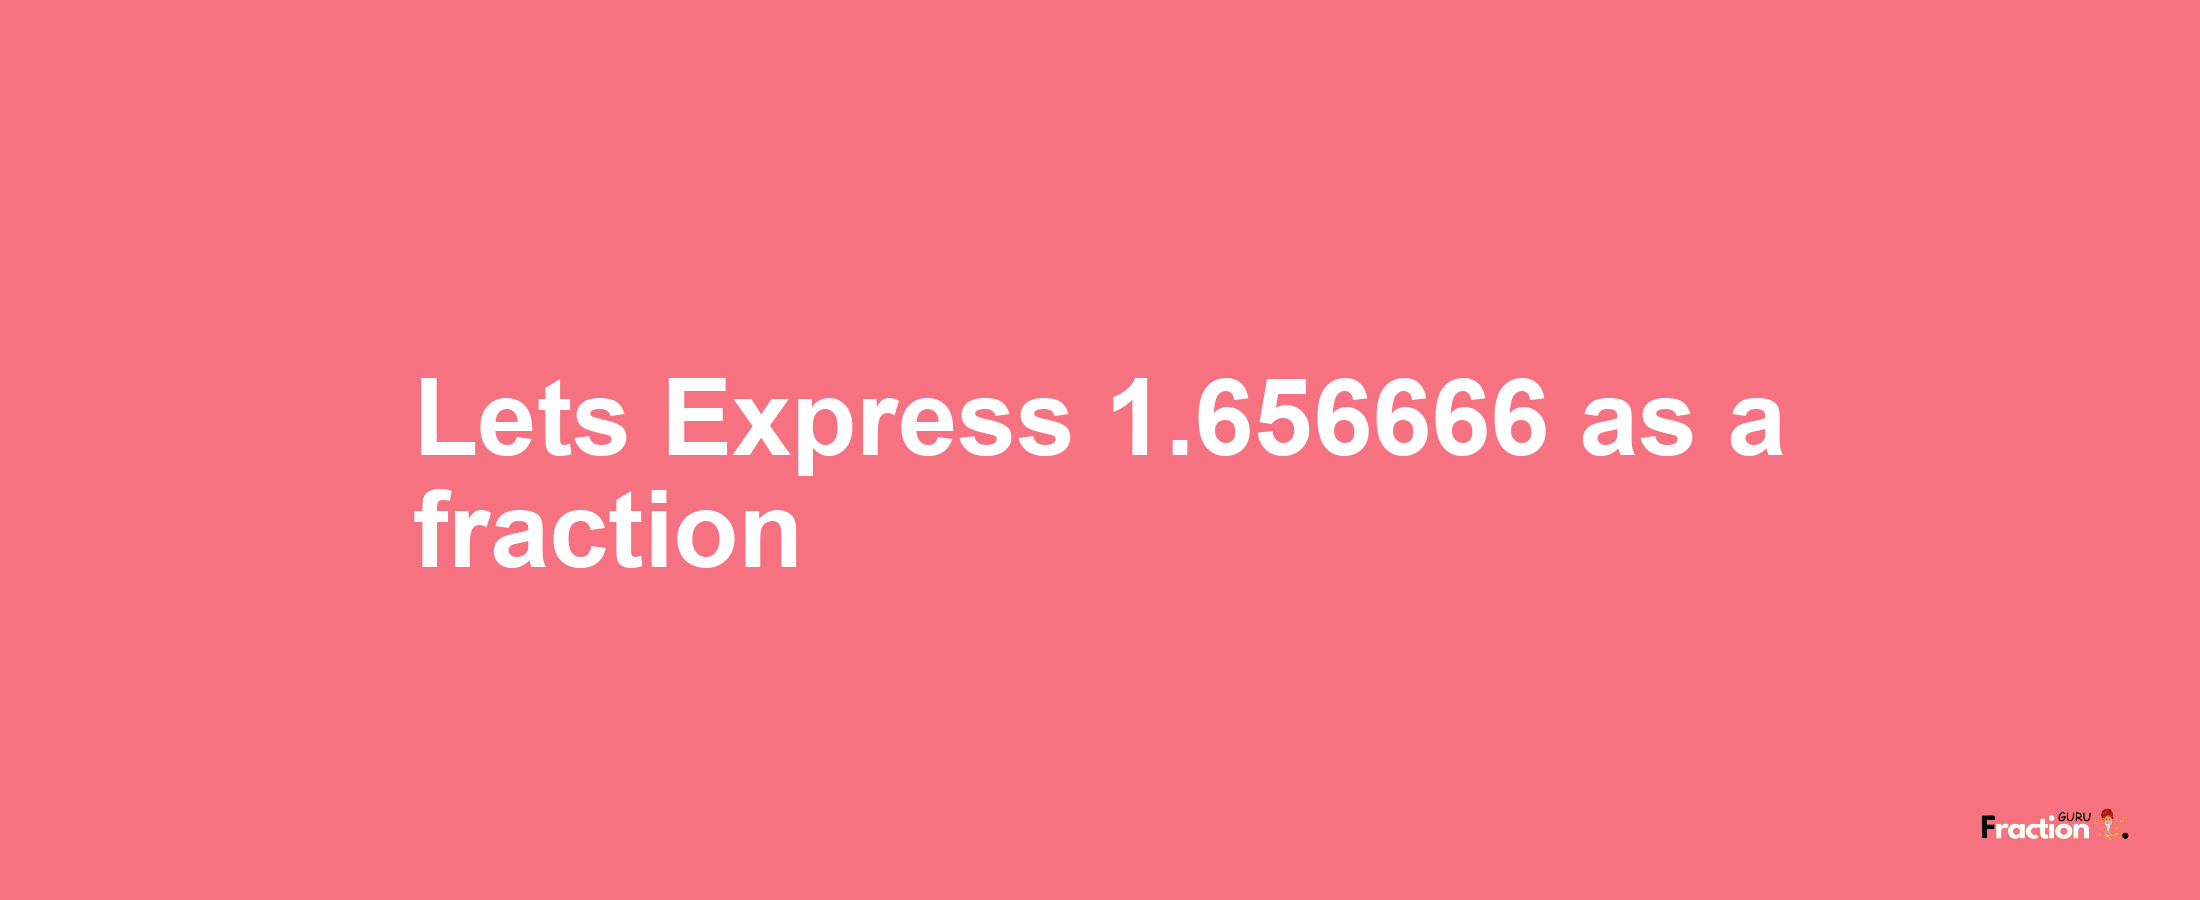 Lets Express 1.656666 as afraction